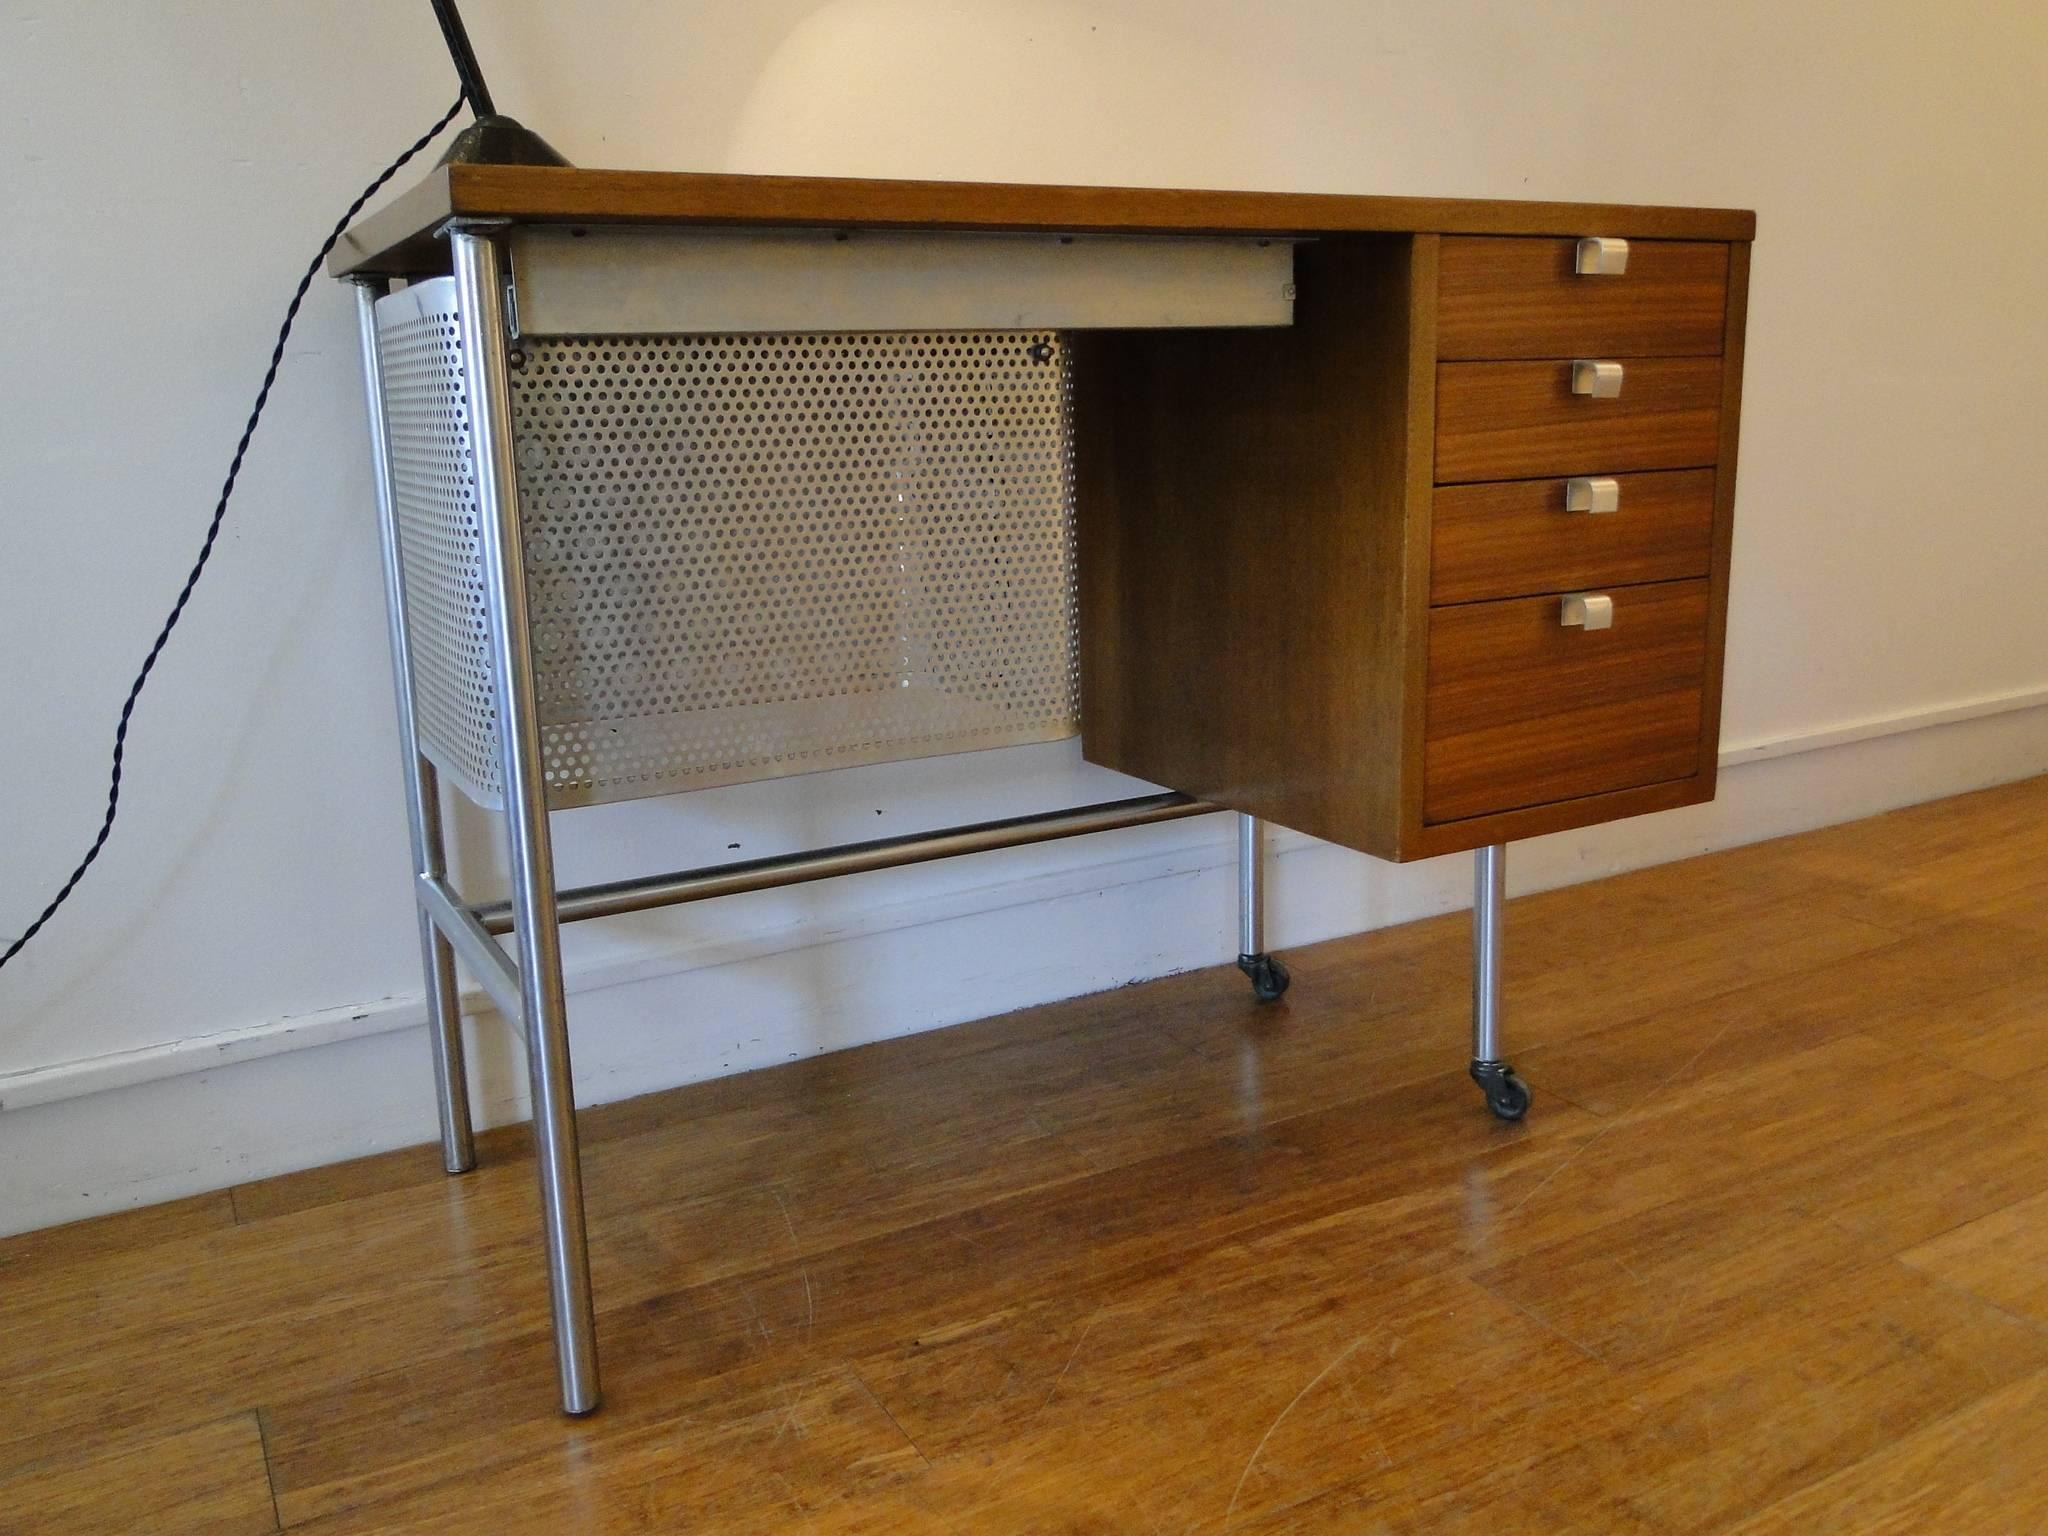 One of Nelson's most engaging designs for Herman Miller, originating in 1947
and lasting well into the 1950s. Desk in excellent condition.